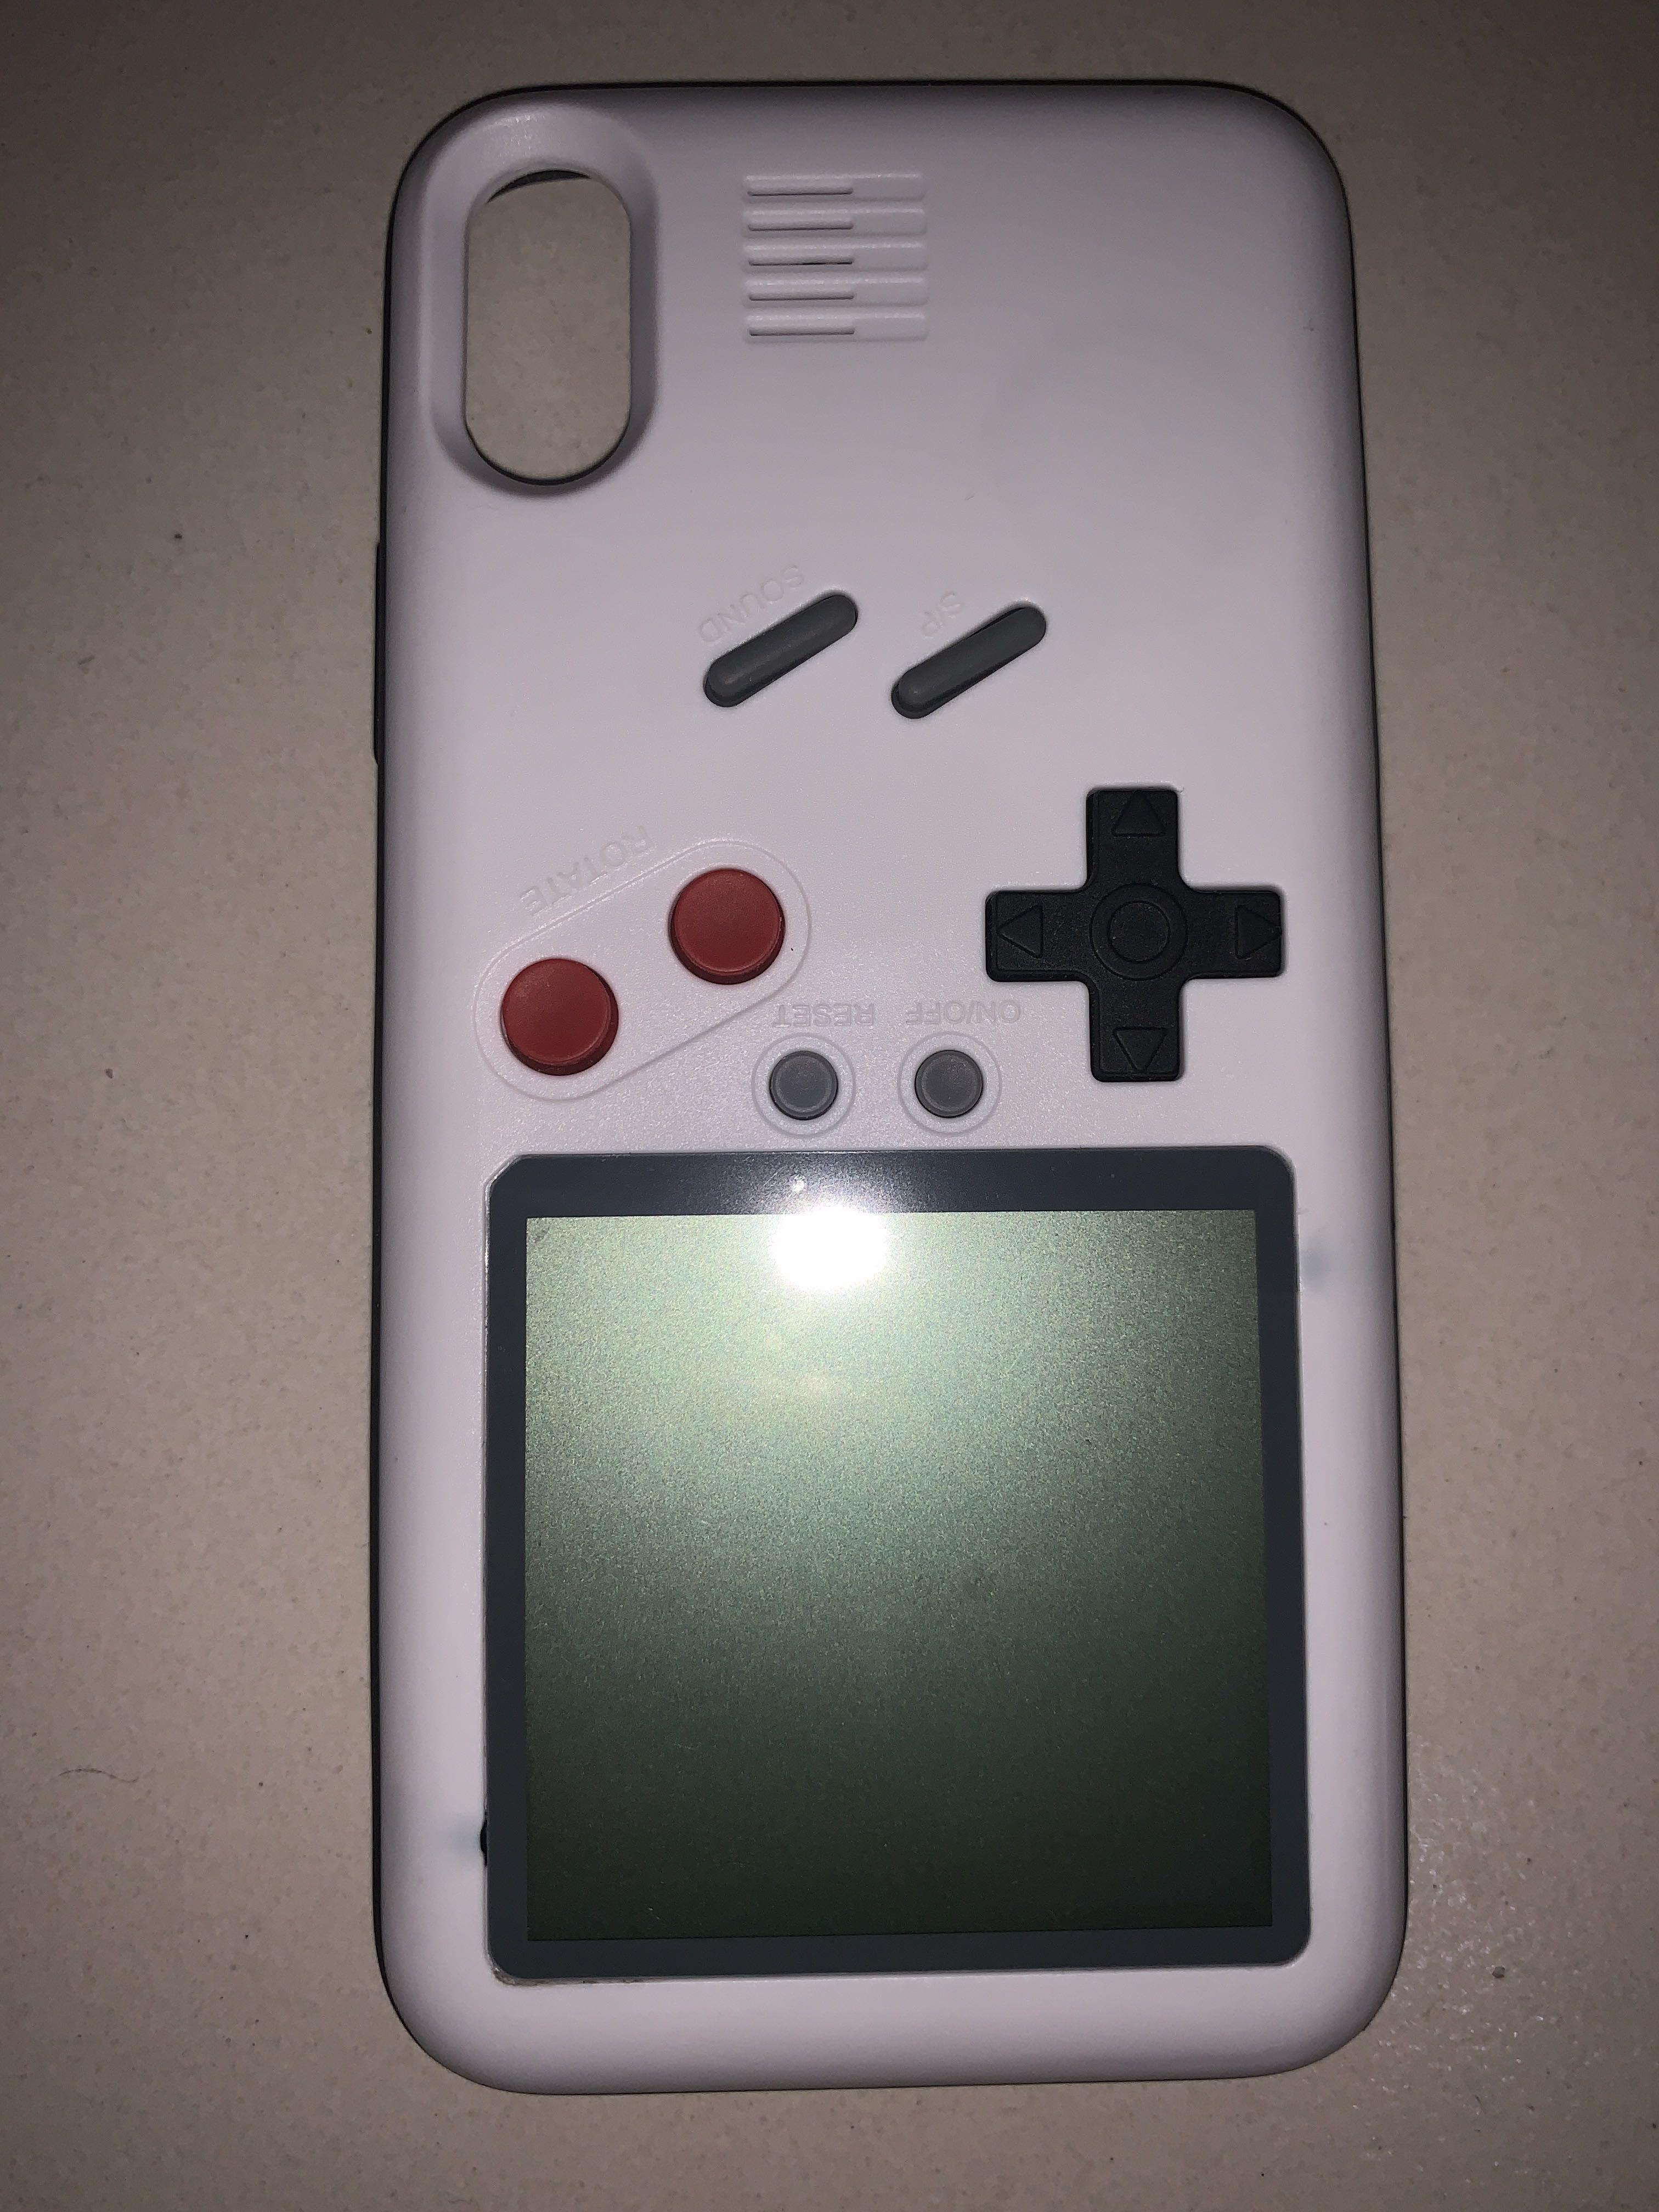 playable gameboy phone case